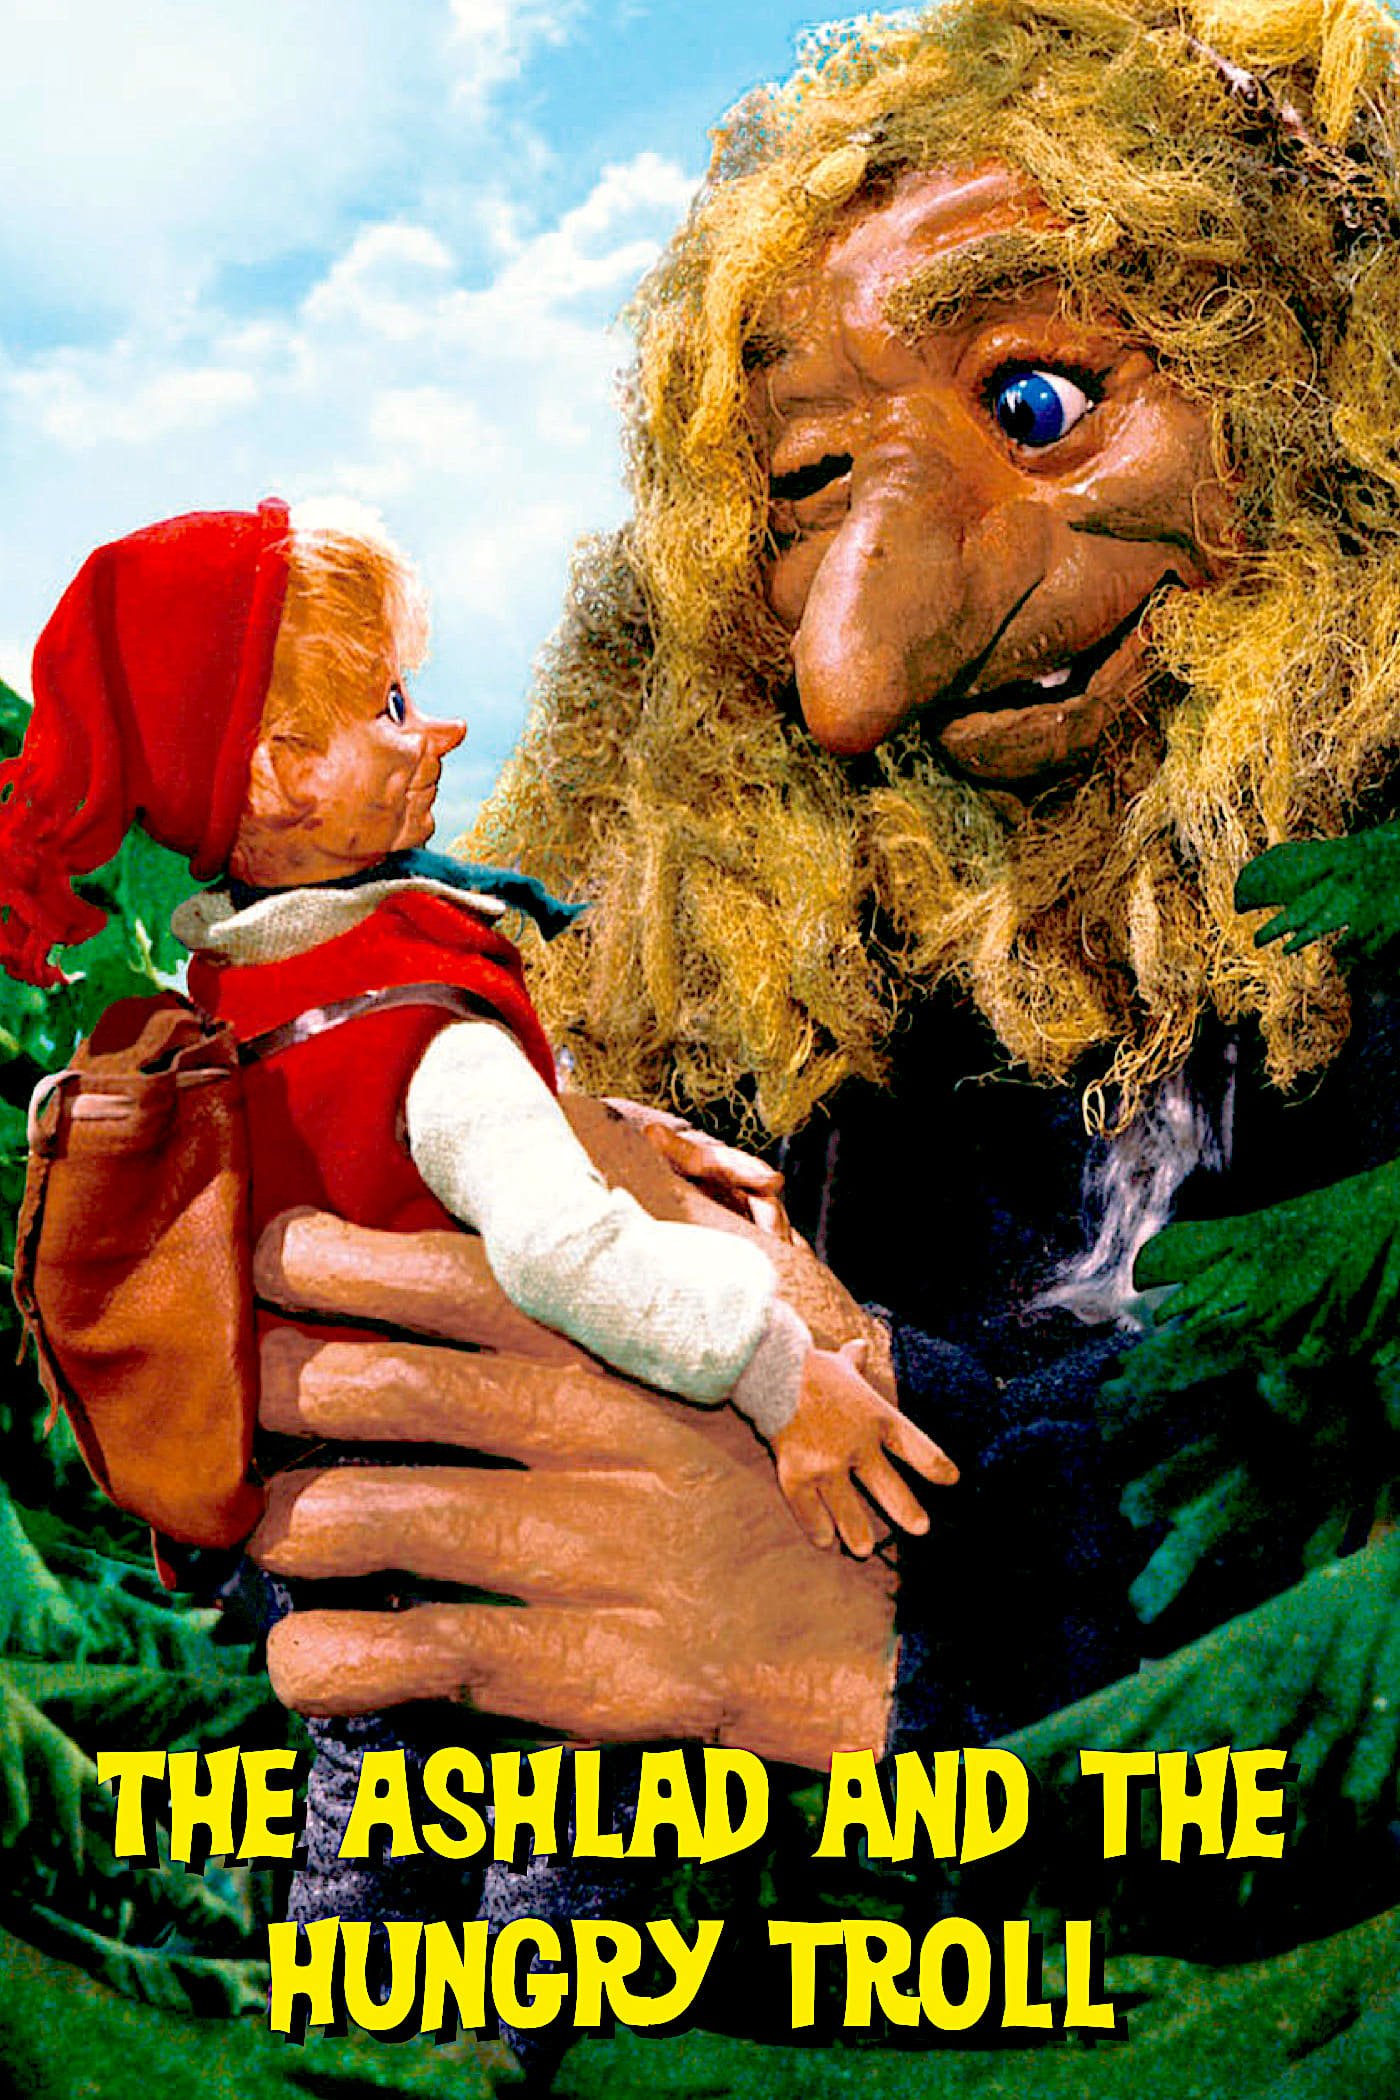 The Ashlad and the Hungry Troll (1967)